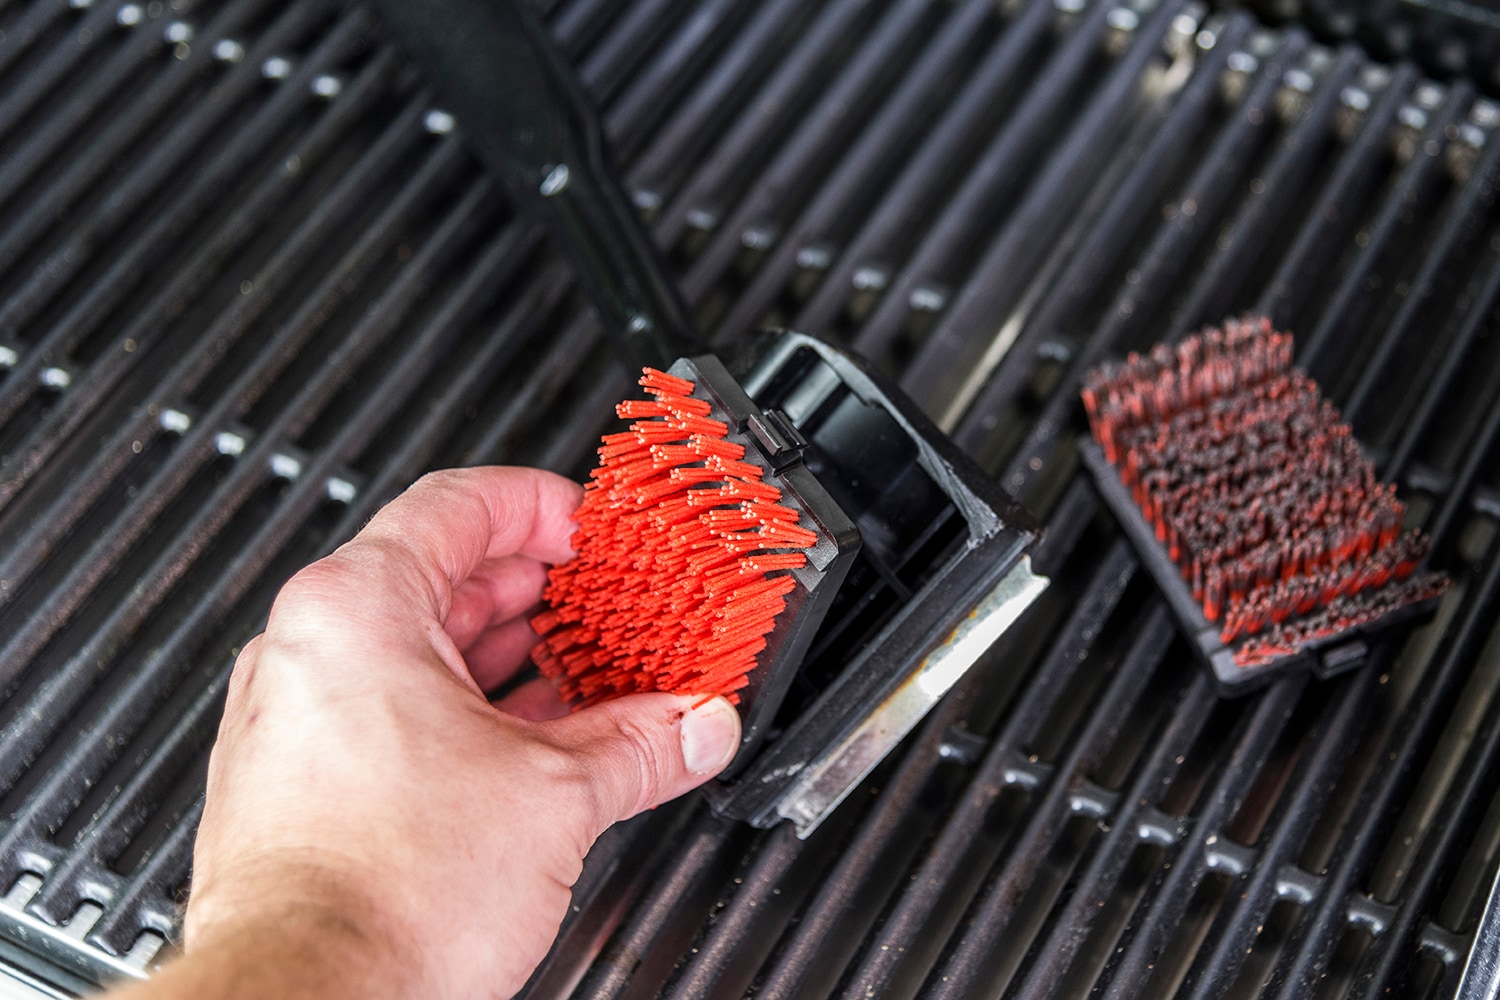 Oxo - Good Grips Nylon Grill Brush Replacement Heads